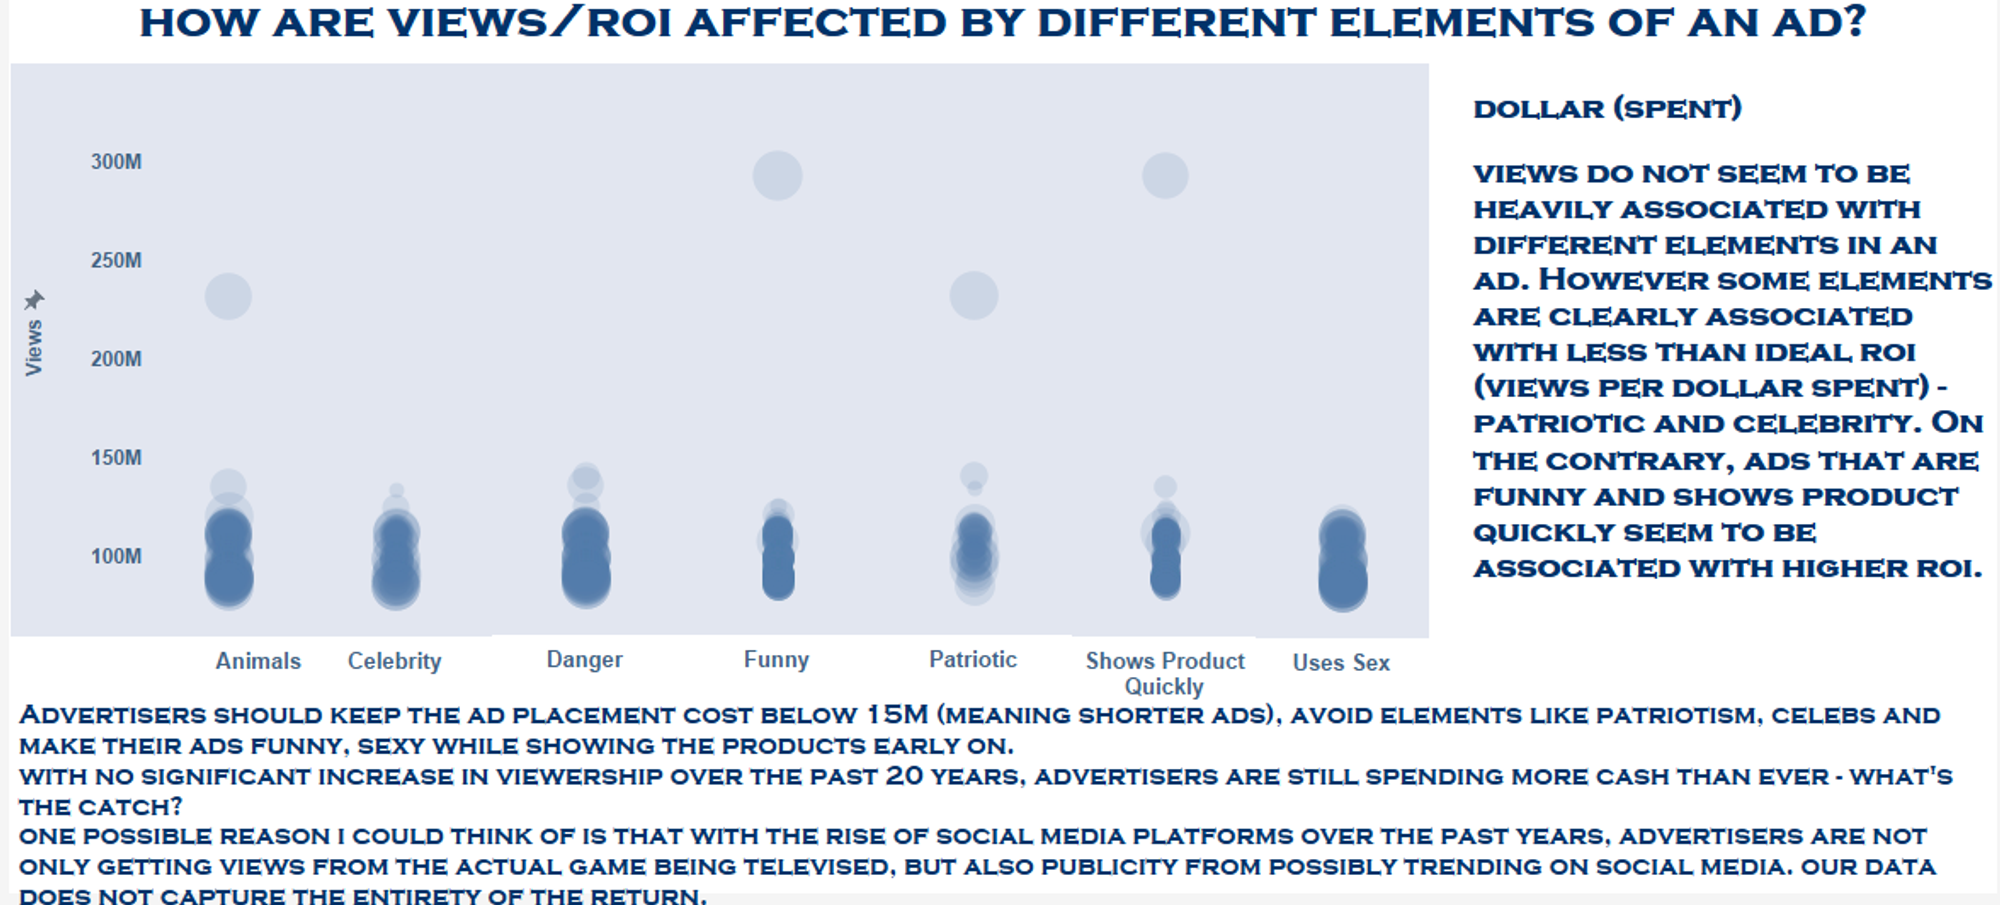 How are views/roi affected by different elements of ads?